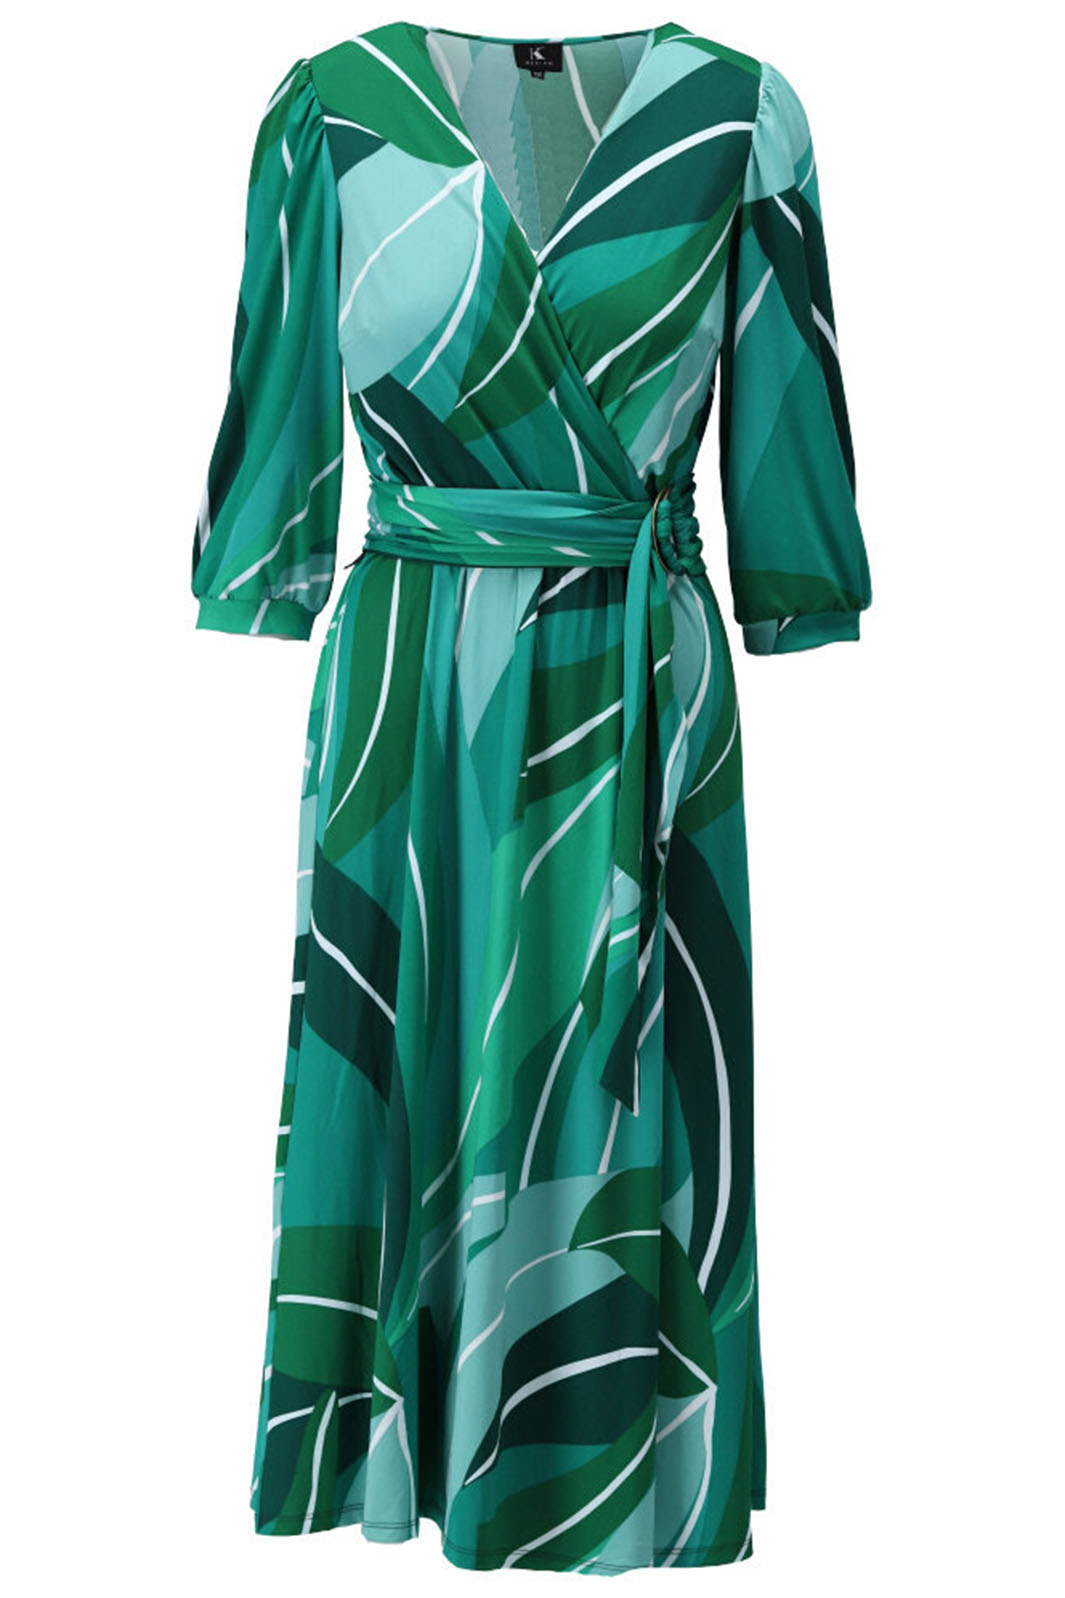 K Design Y309 P742 Green Print Cross Over Dress With Sleeves - Experience Boutique